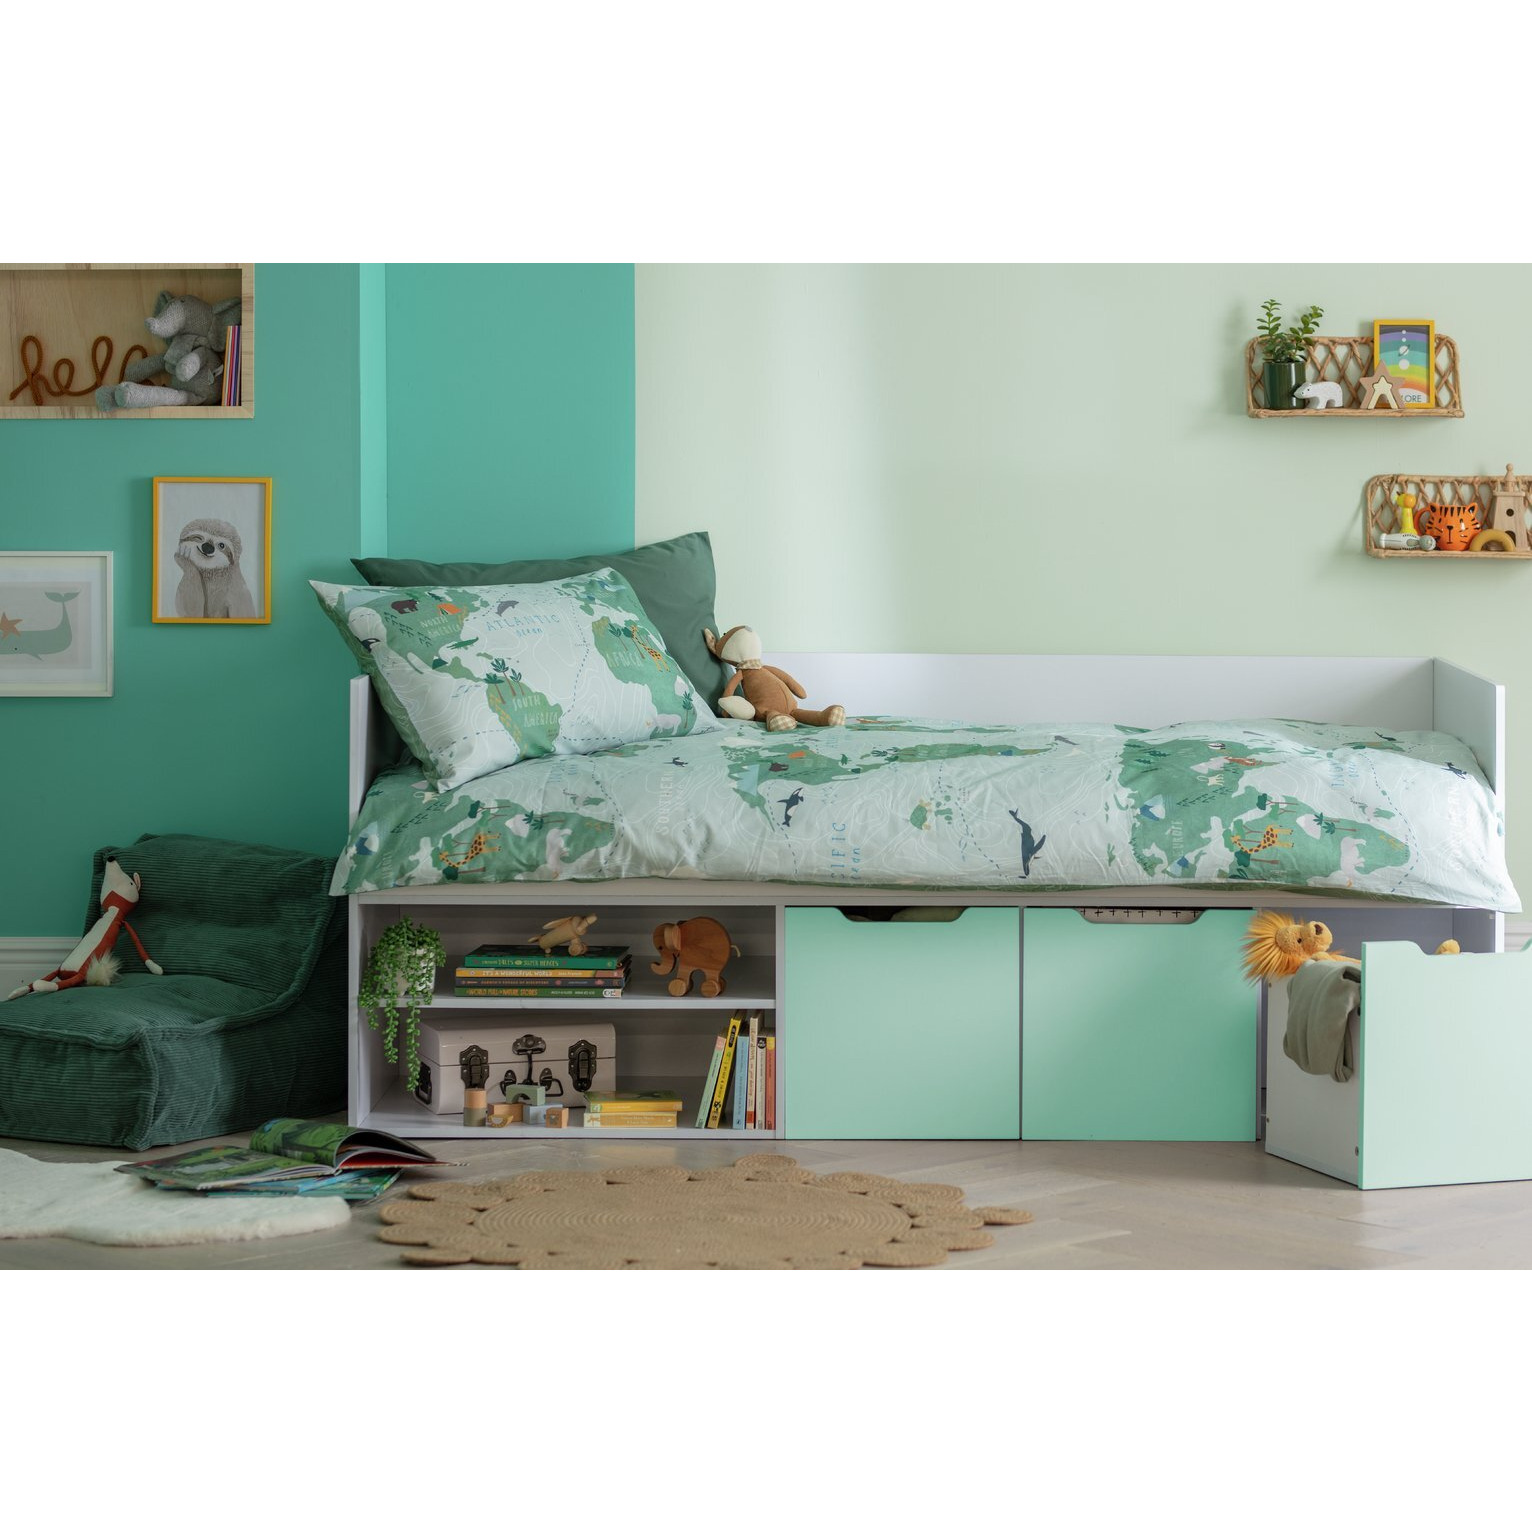 Habitat Jude Cabin Bed Frame - White And Green - image 1